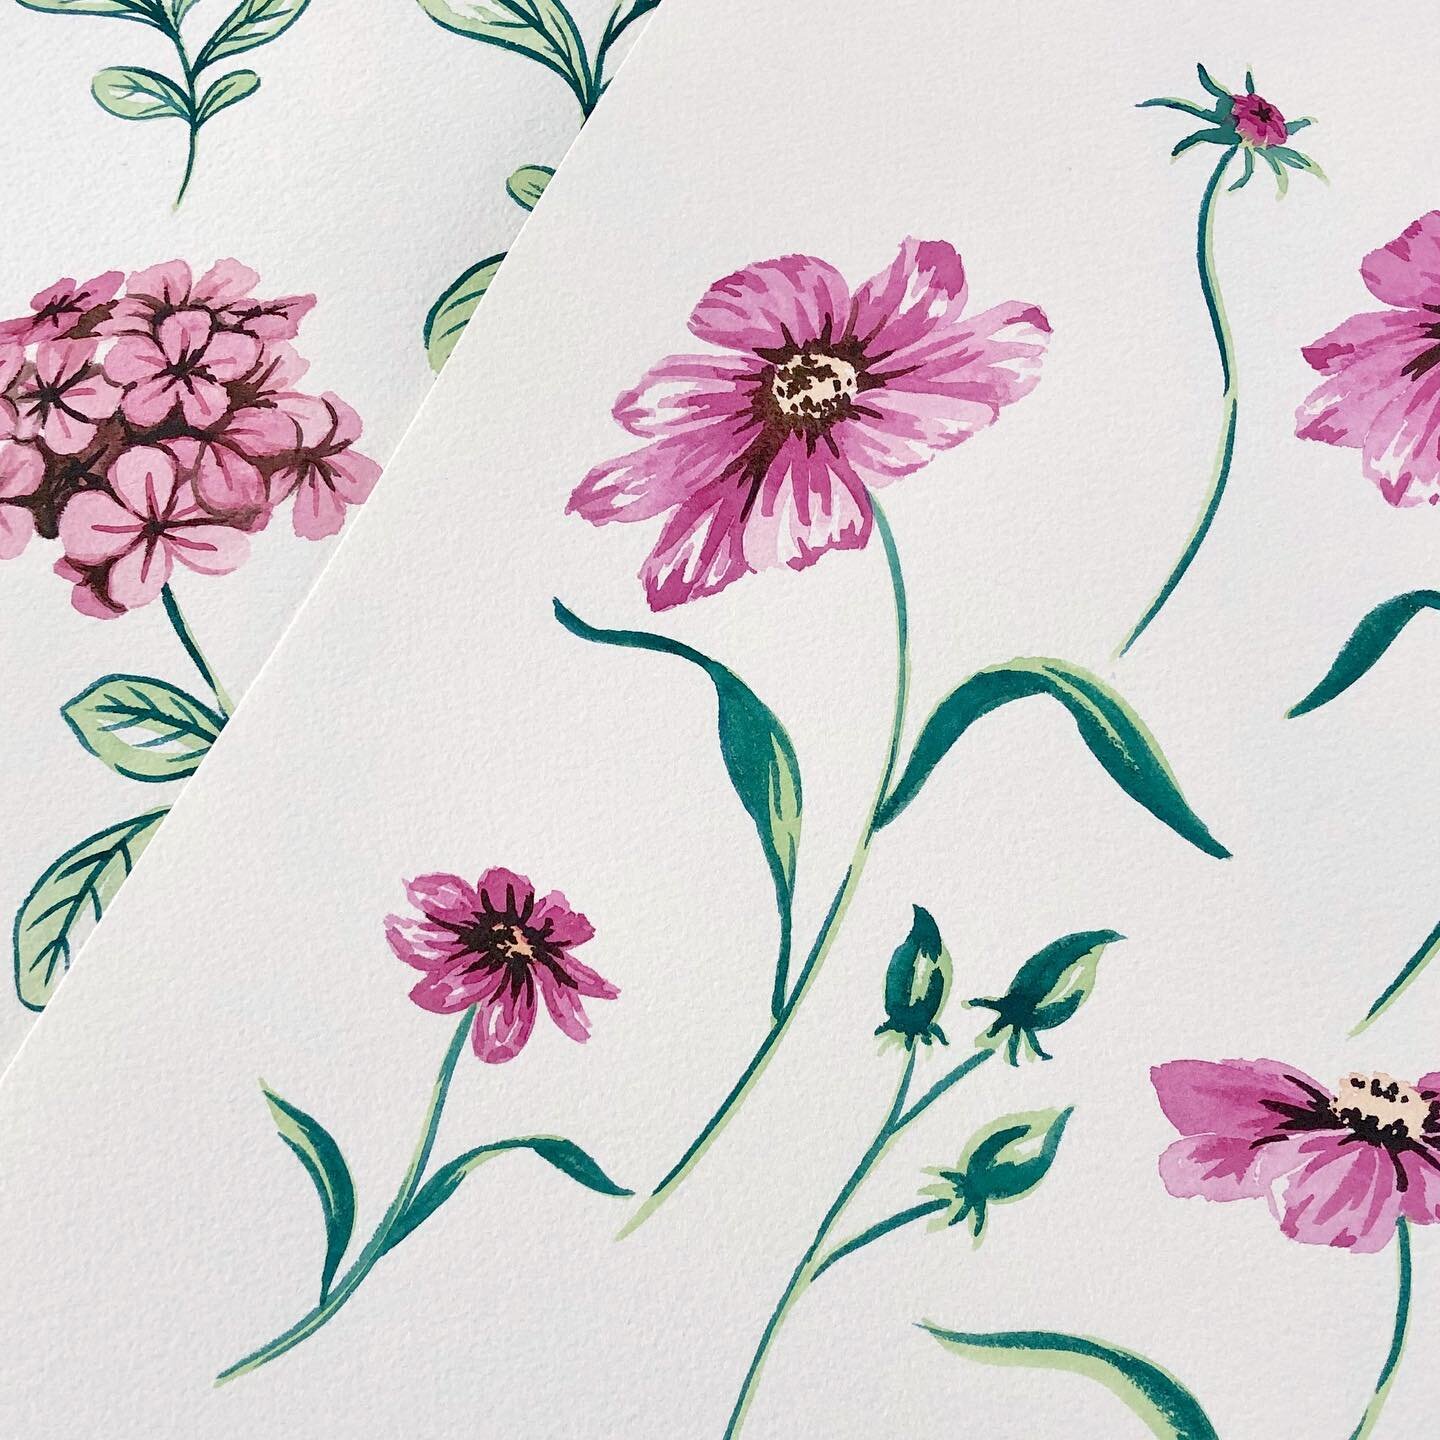 Day 88/100..Some pretty pink cosmos flowers... #watercolorflowers #floralpainting #floralsketch #watercolor #watercolorfloral #winsorandnewton #everydaywatercolor #princetonbrushes #flower #floralart #flowerdrawing #floral #floraldrawing #cosmos #pin